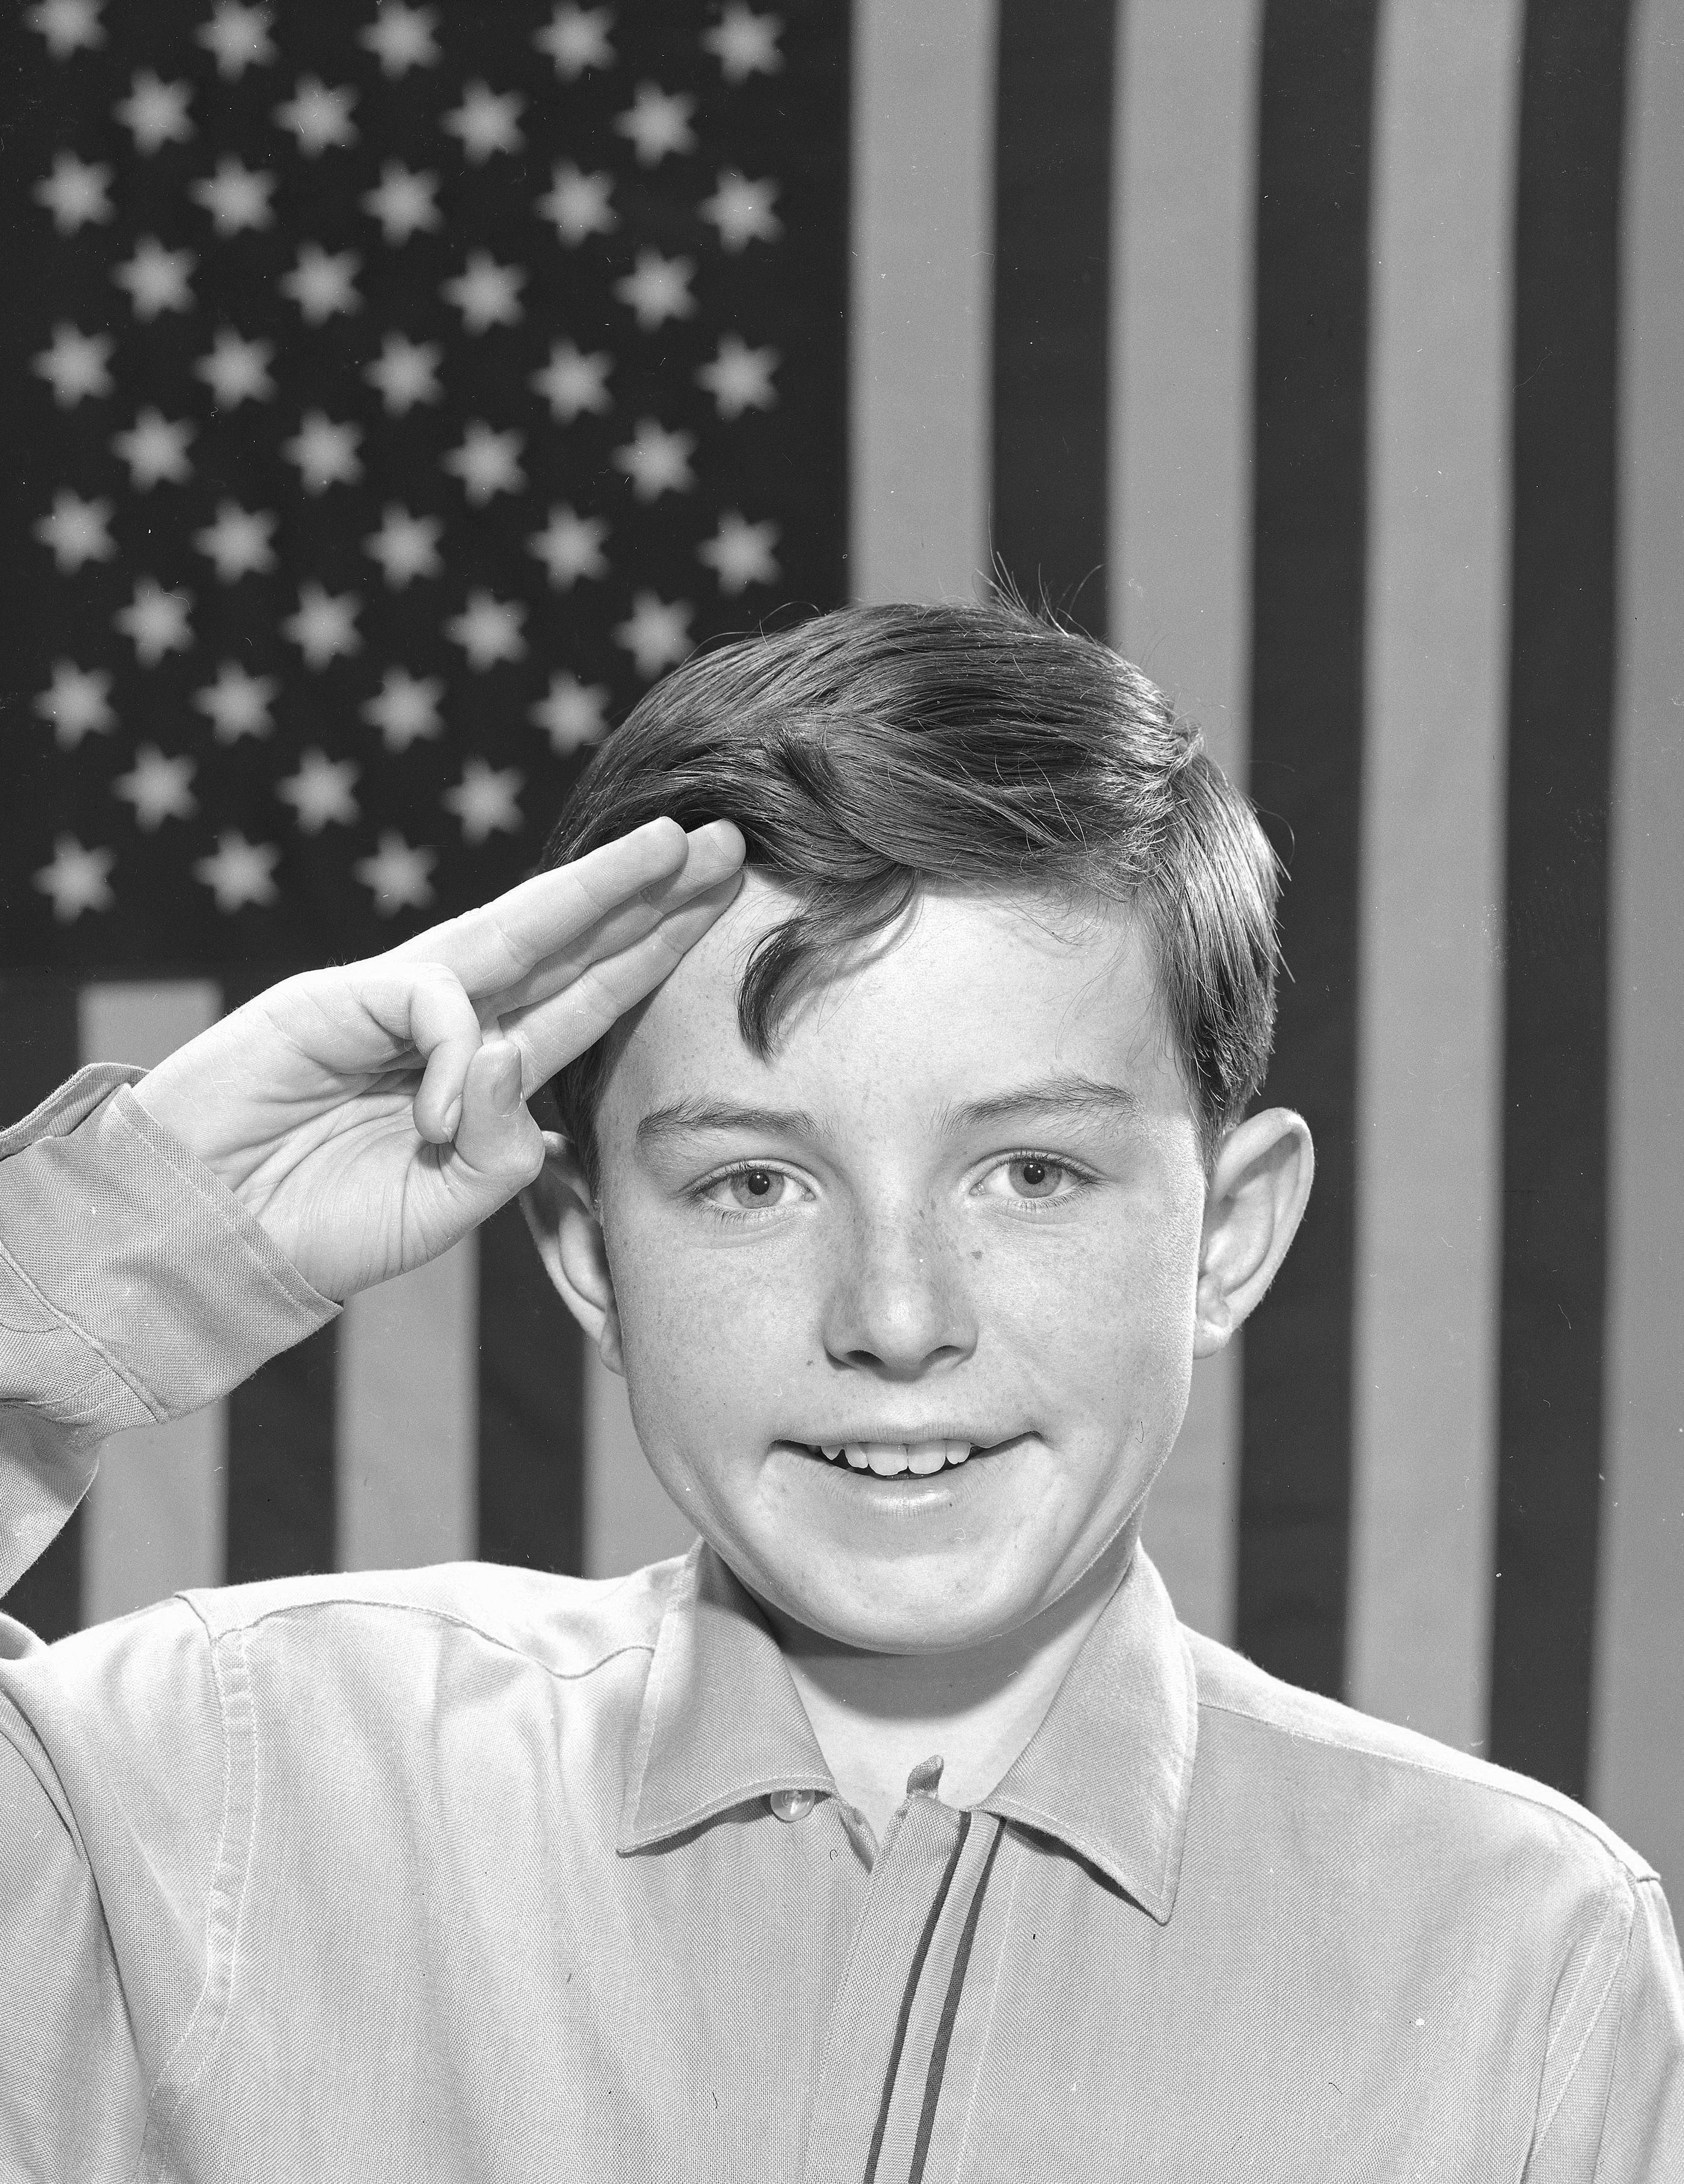 'Leave It to Beaver' star Jerry Mathers saluting the flag, 1961